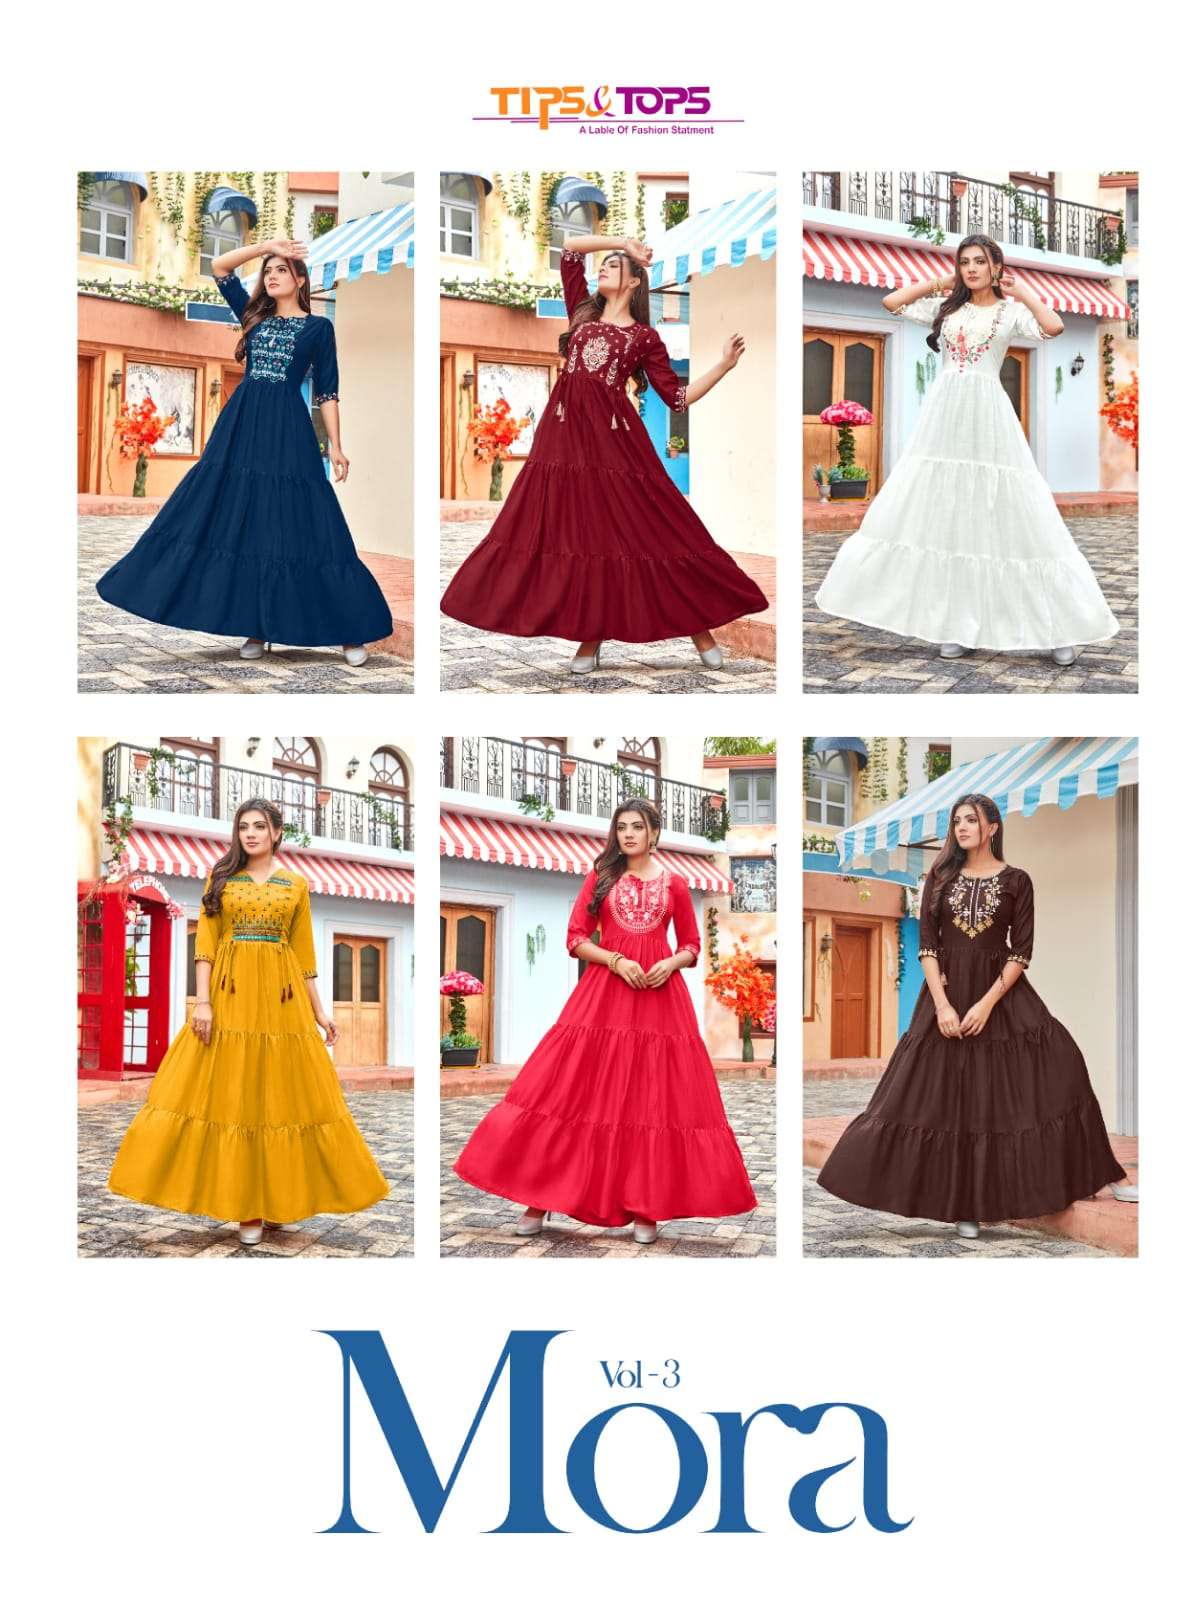 Tips & Tops Mora Vol 3 Catalog Party Wear Long Gowns